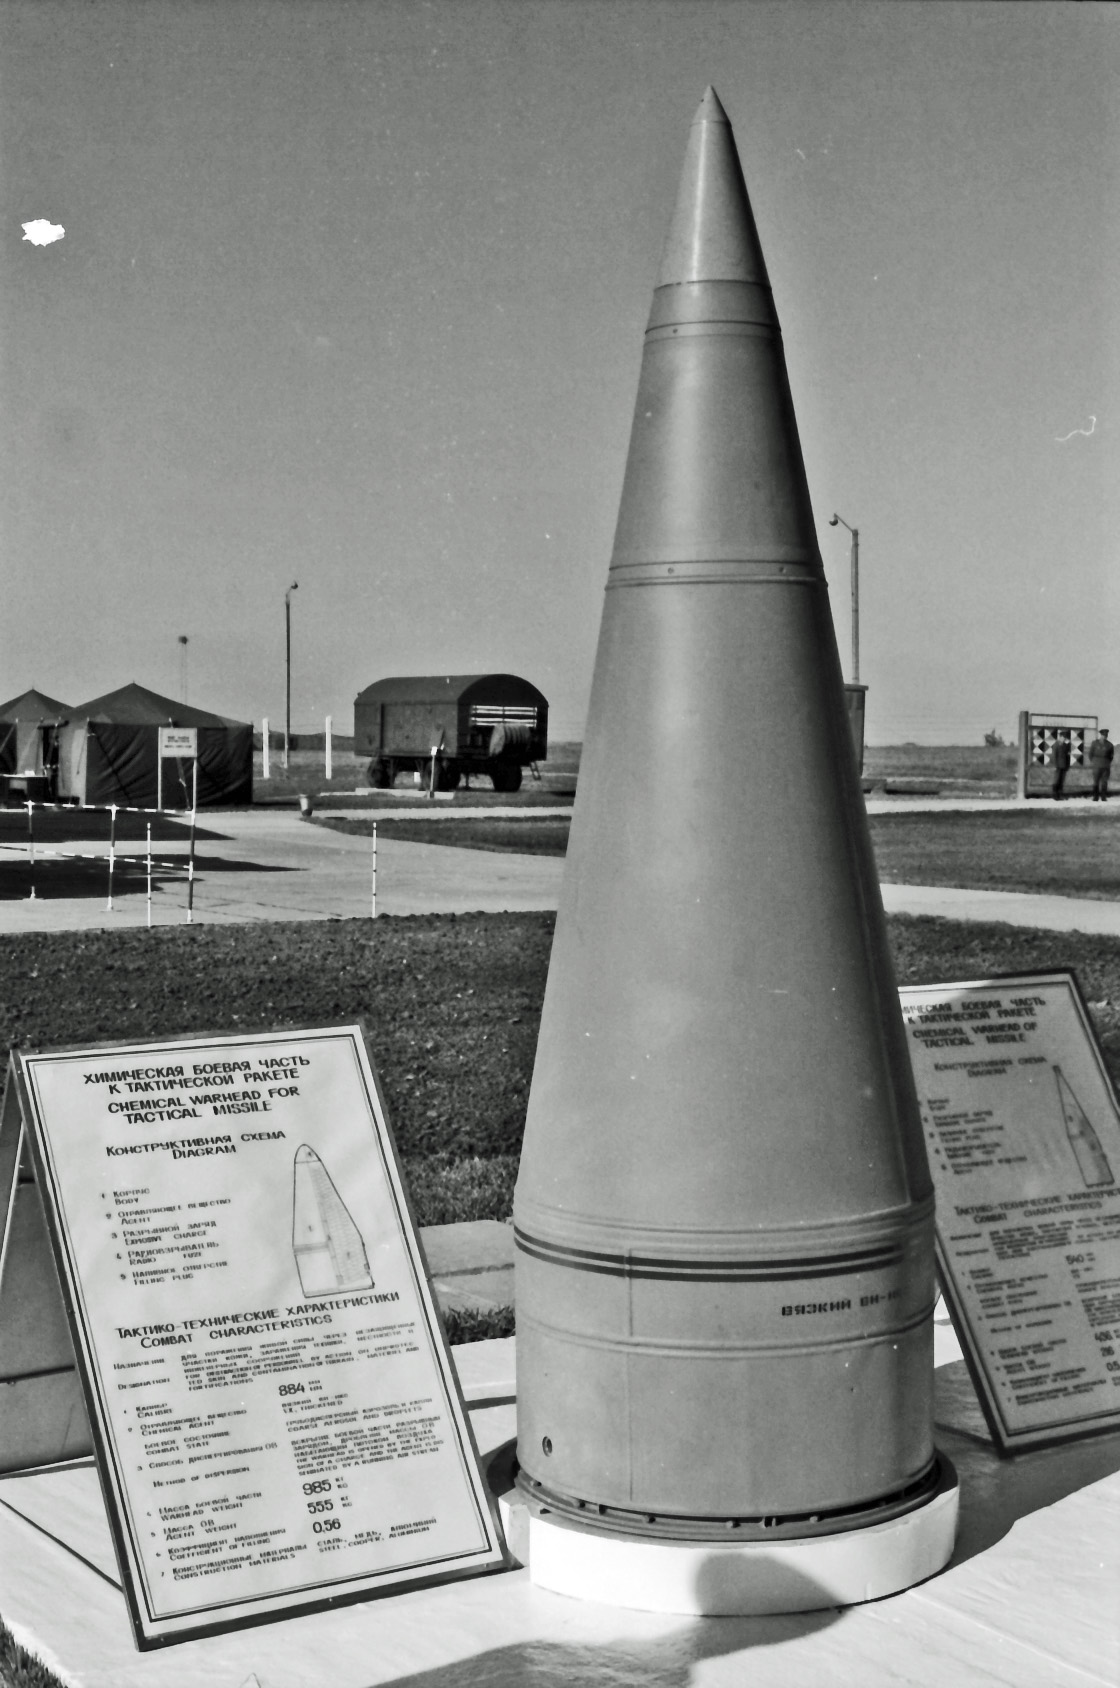 Chemical warhead for the Scud missile. Filled with 555 kilograms of persistent VX nerve gas. Lethal dose (LD50) = 10 mg 